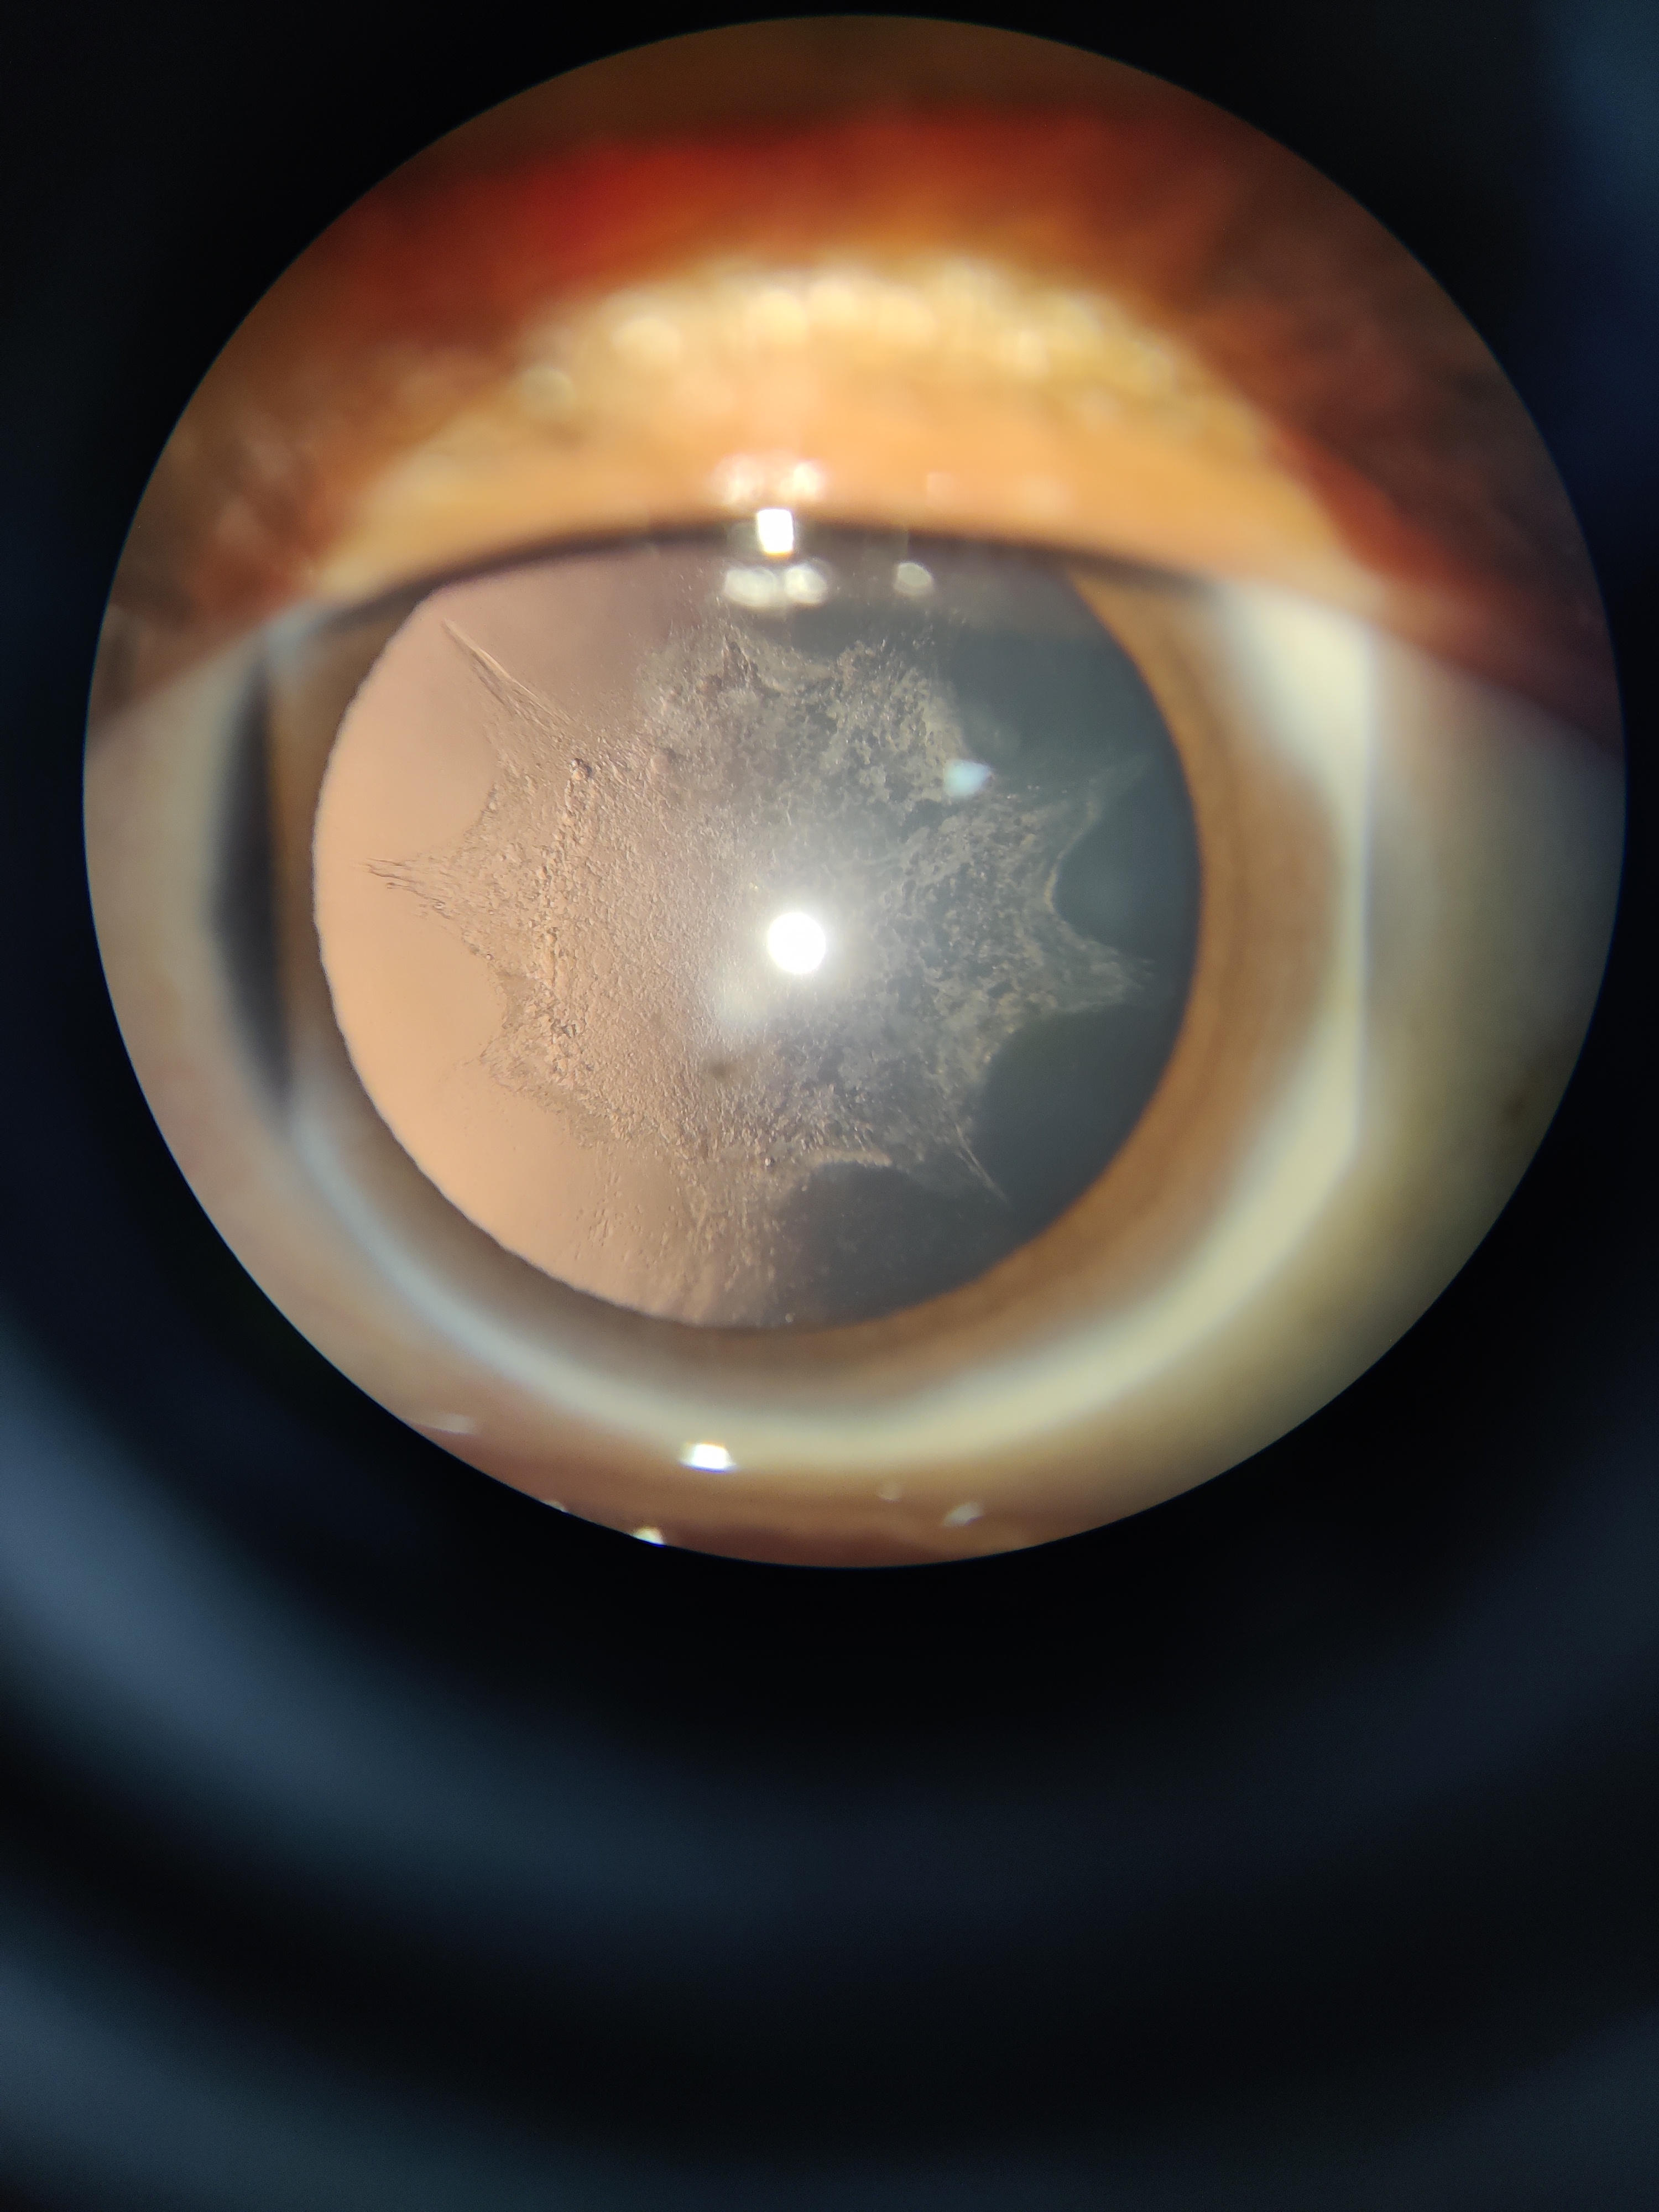 Slit lamp examination under retroillumination of a patient with complicated cataract, reveals diffuse Posterior subcapsular cataract with typical BREADCRUMB appearance.